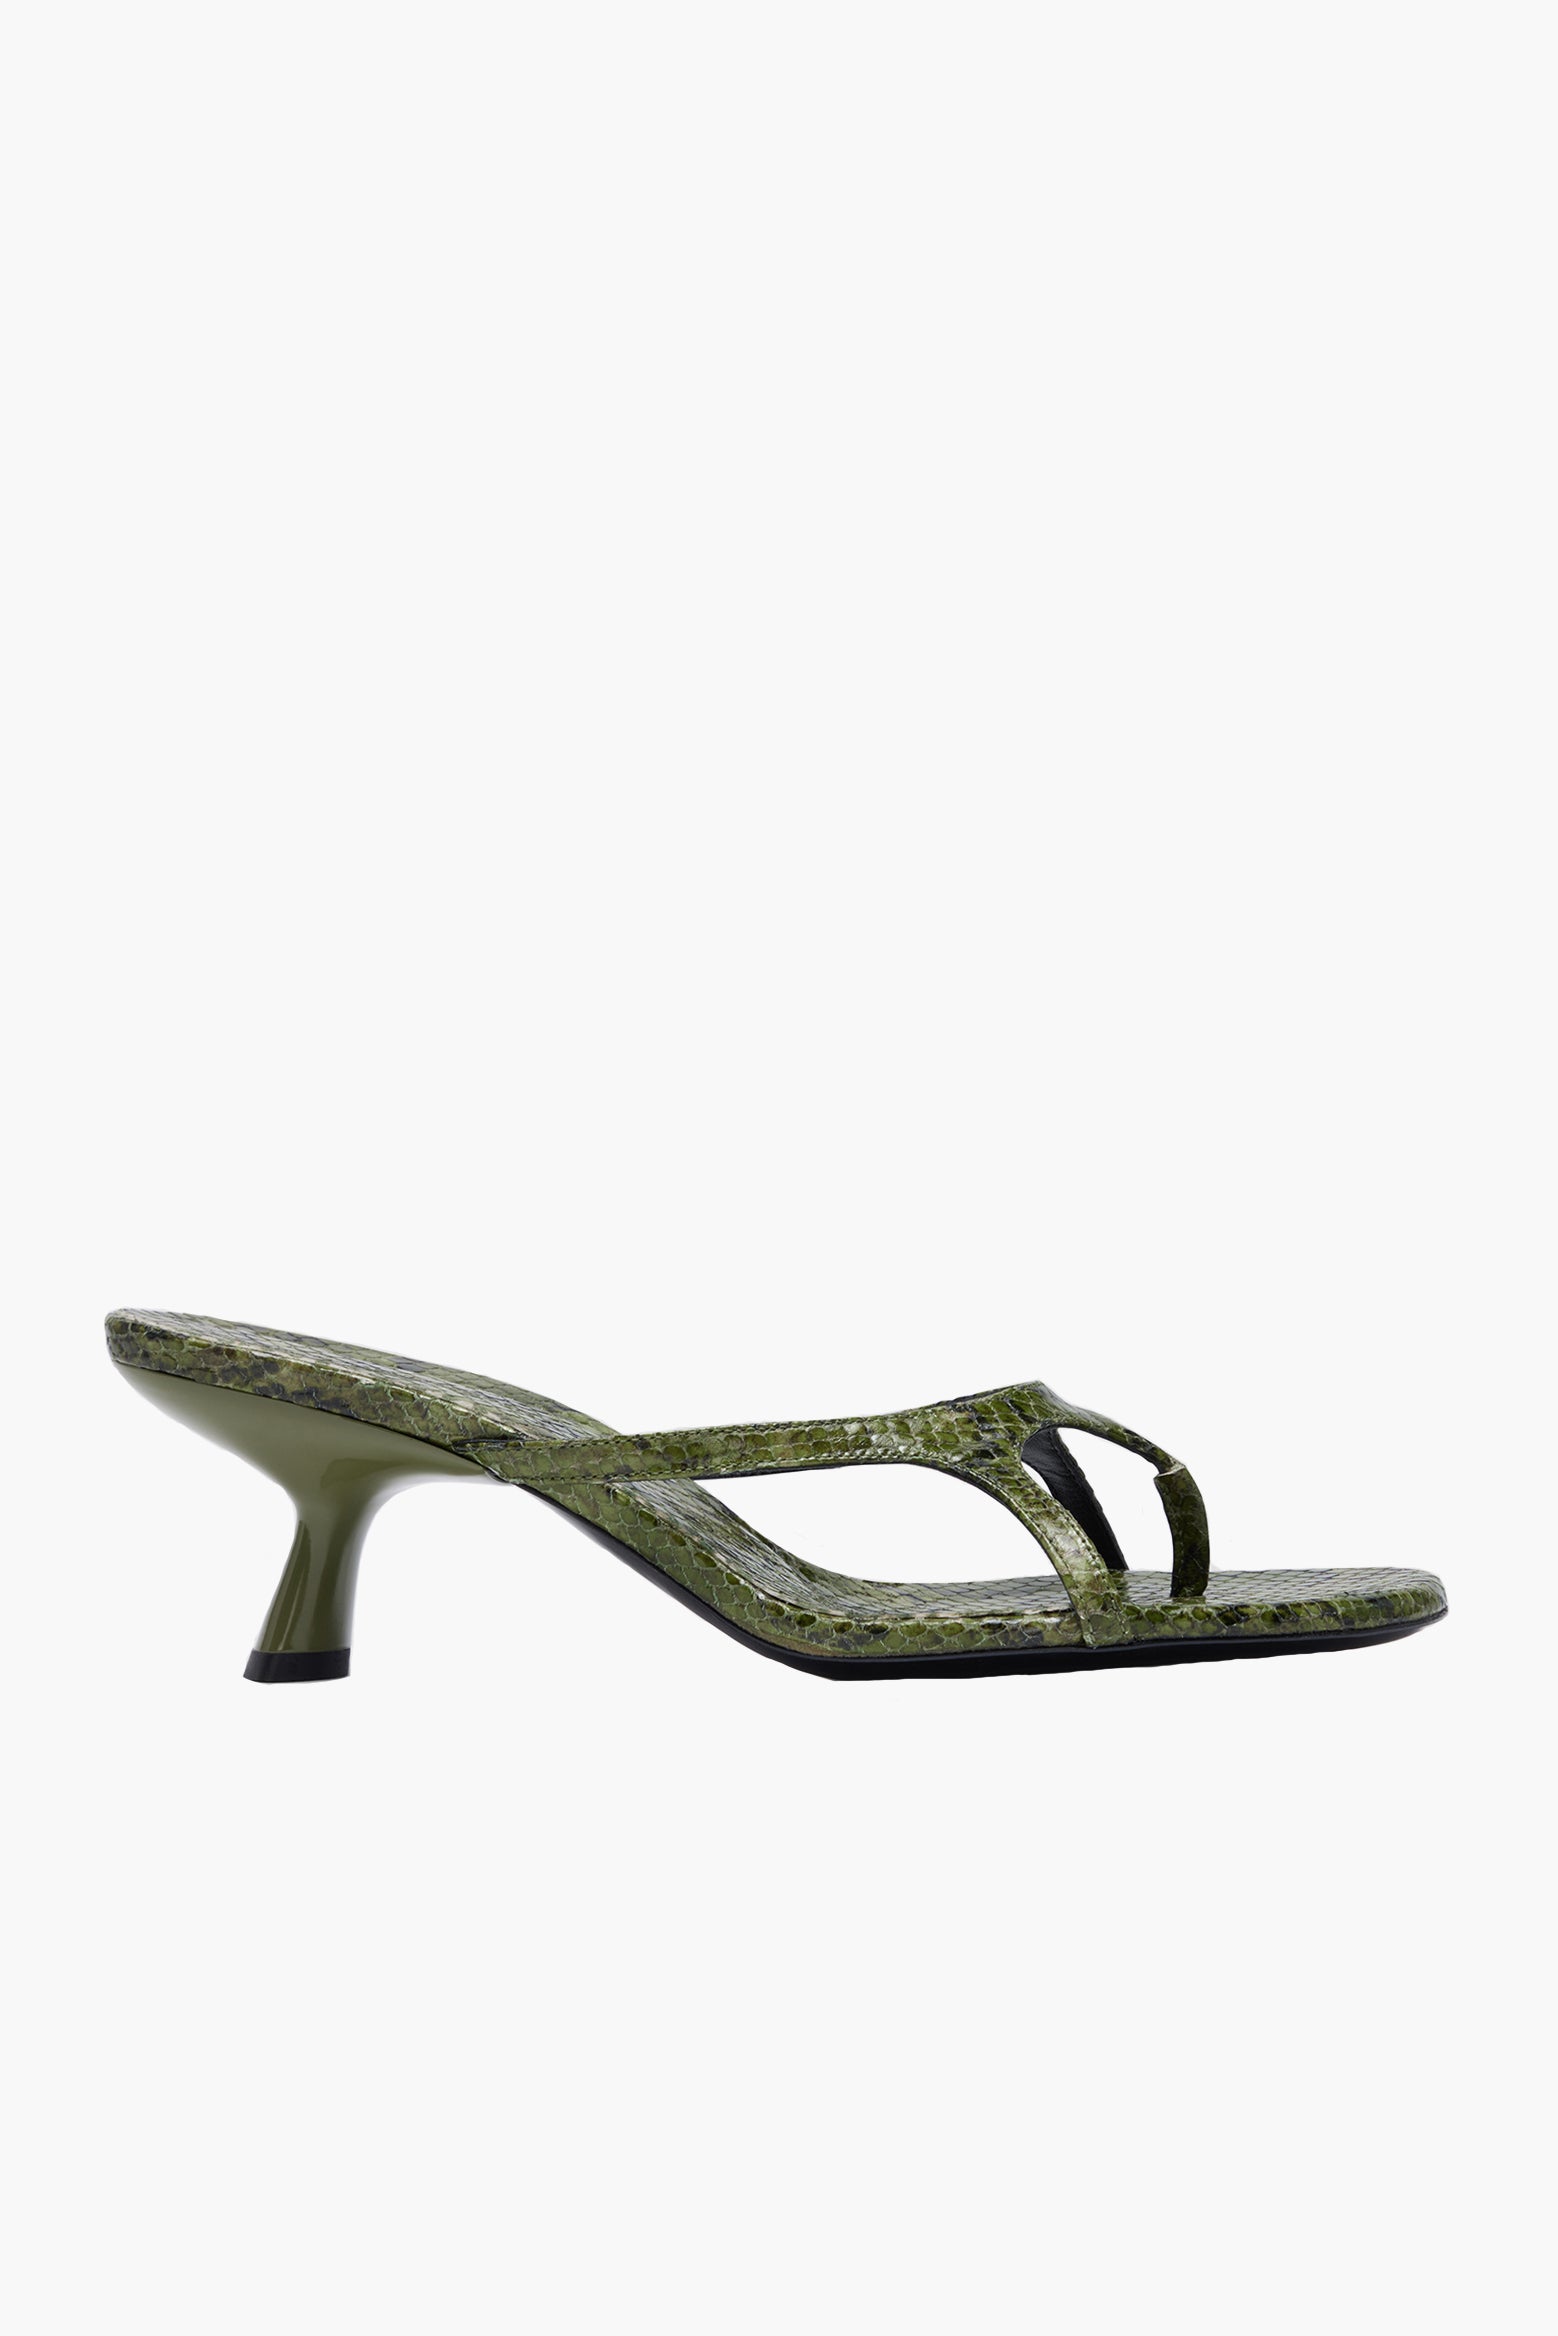 The Christopher Esber Harlowe Textured Mule available at The New Trend Australia